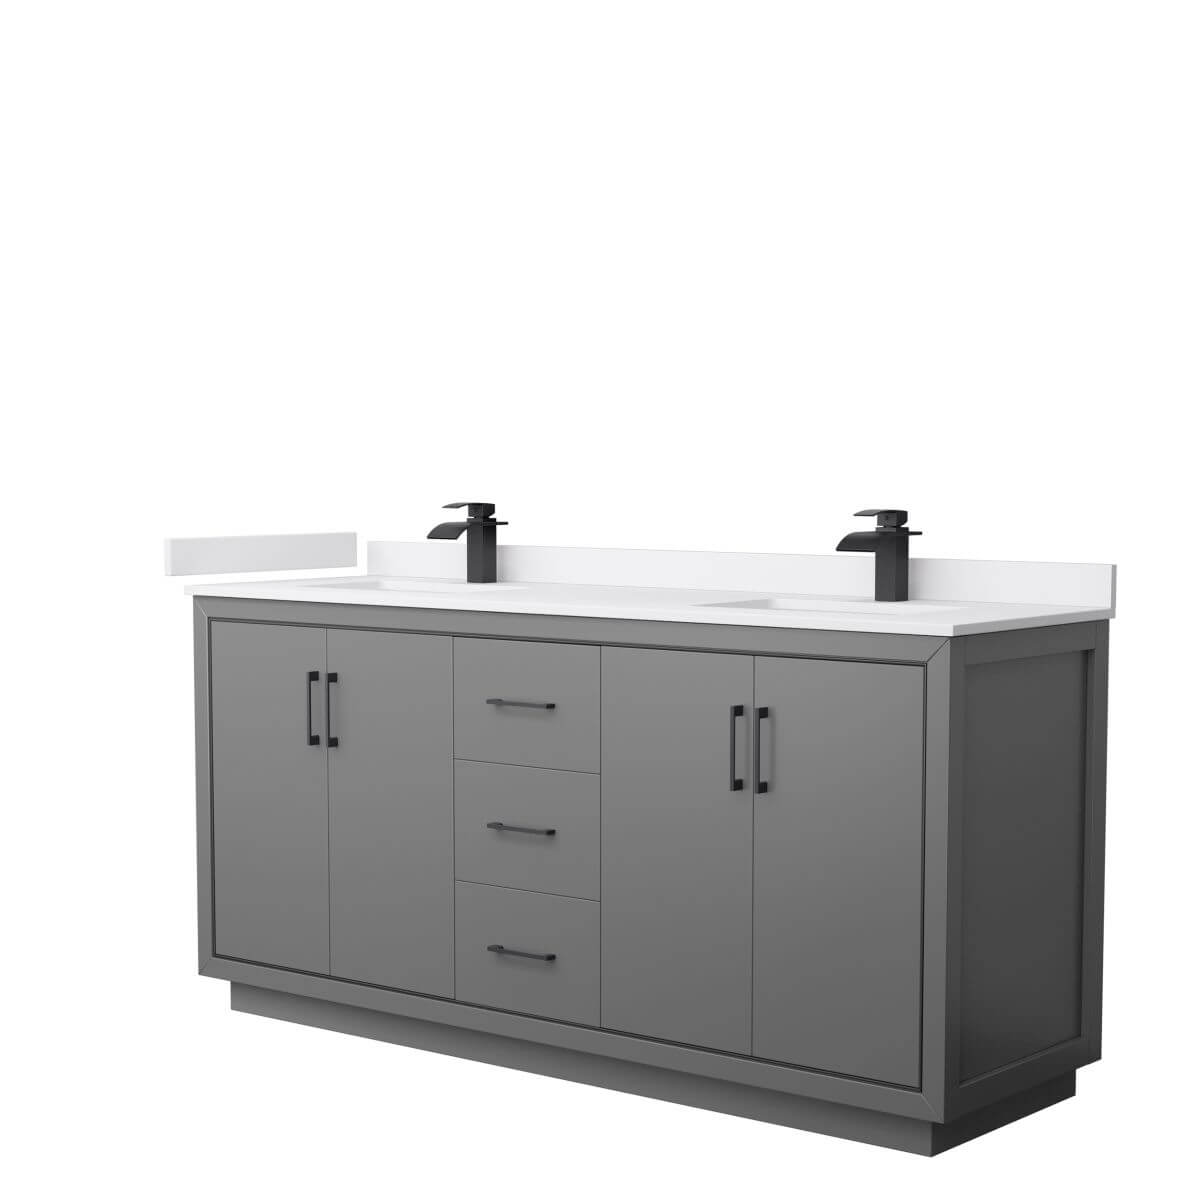 Wyndham Collection WCF111172DGBWCUNSMXX Icon 72 inch Double Bathroom Vanity in Dark Gray with White Cultured Marble Countertop, Undermount Square Sinks and Matte Black Trim